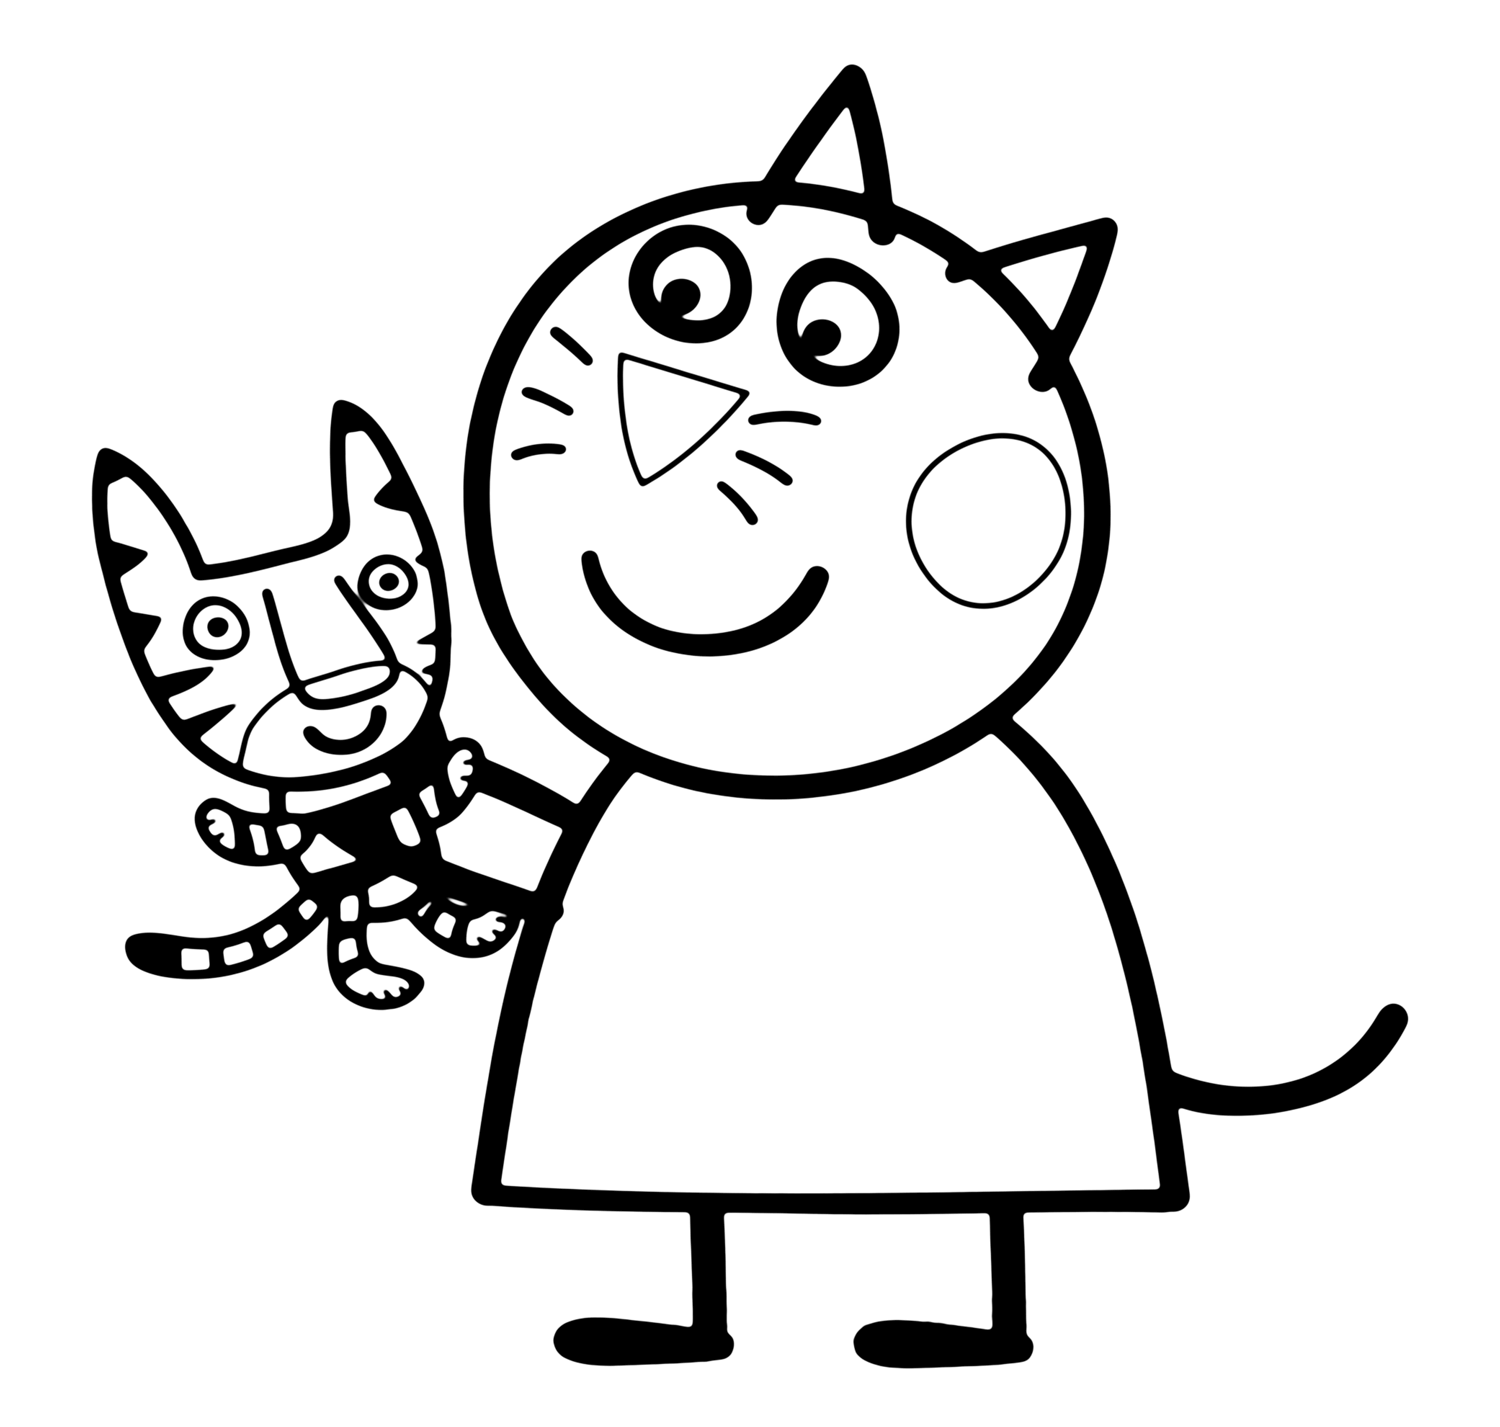 Candy Cat In Peppa Pig Coloring Page